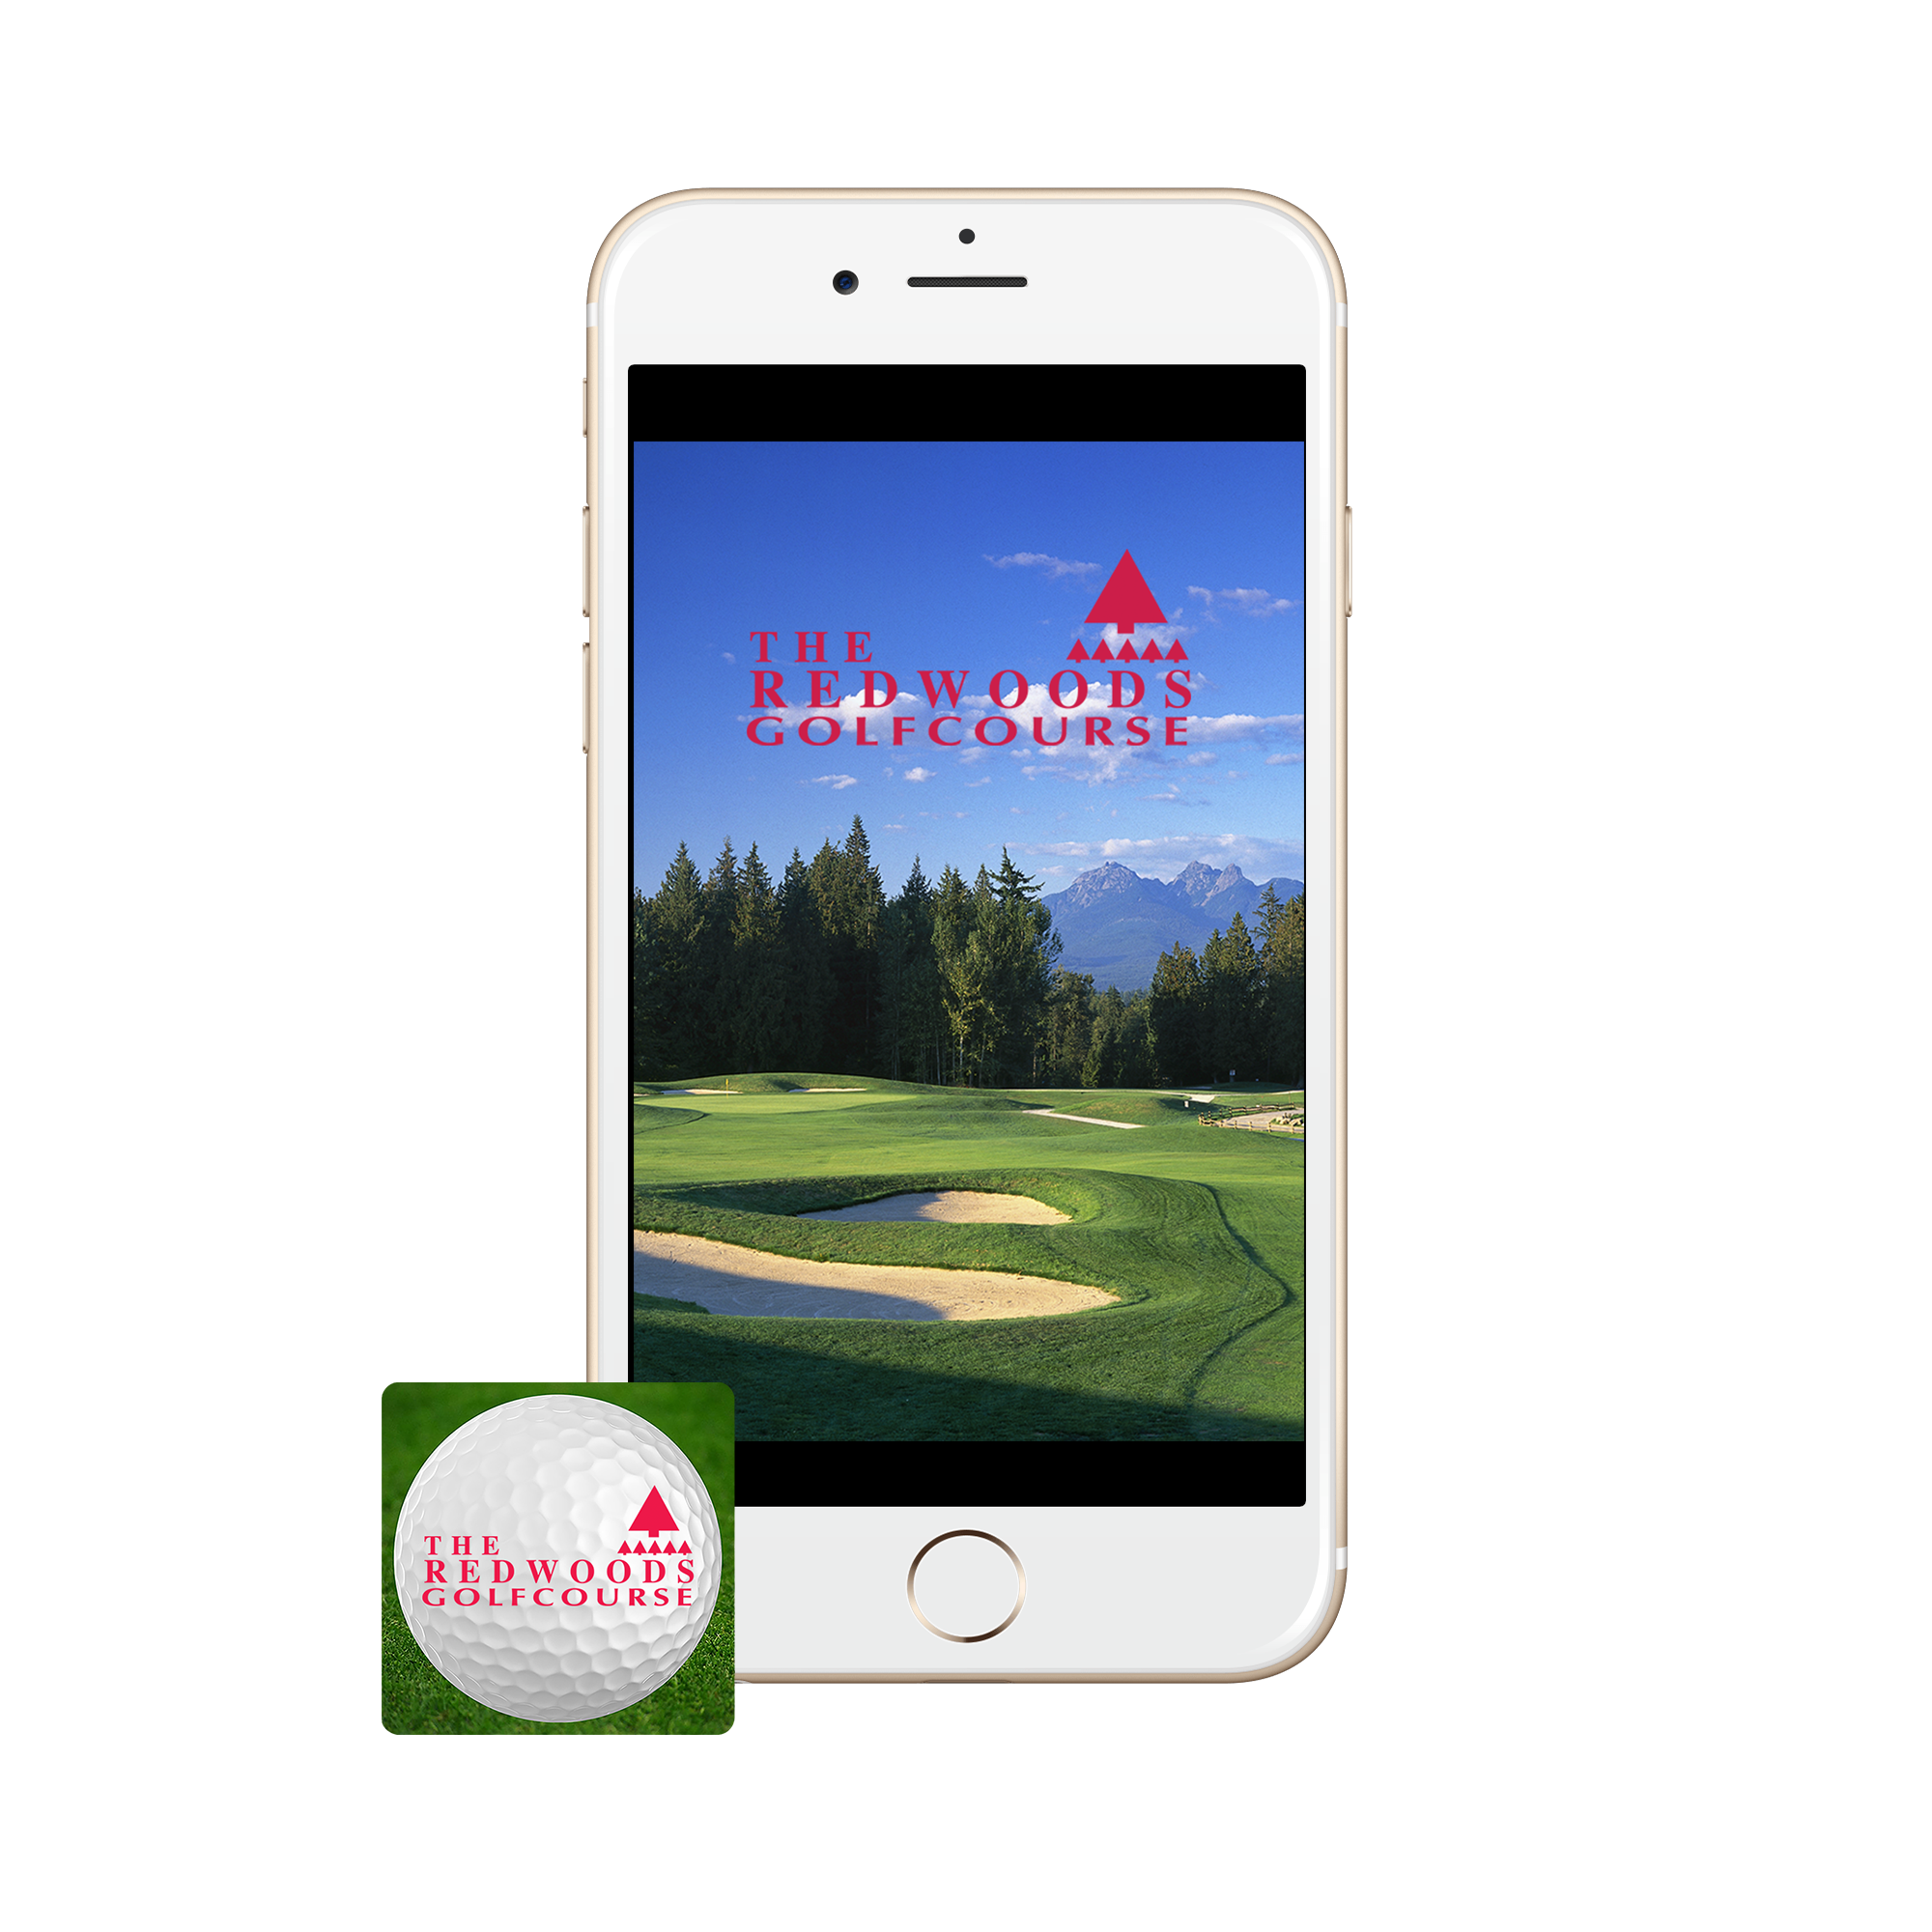 Redwoods golf course iPhone app with Icon